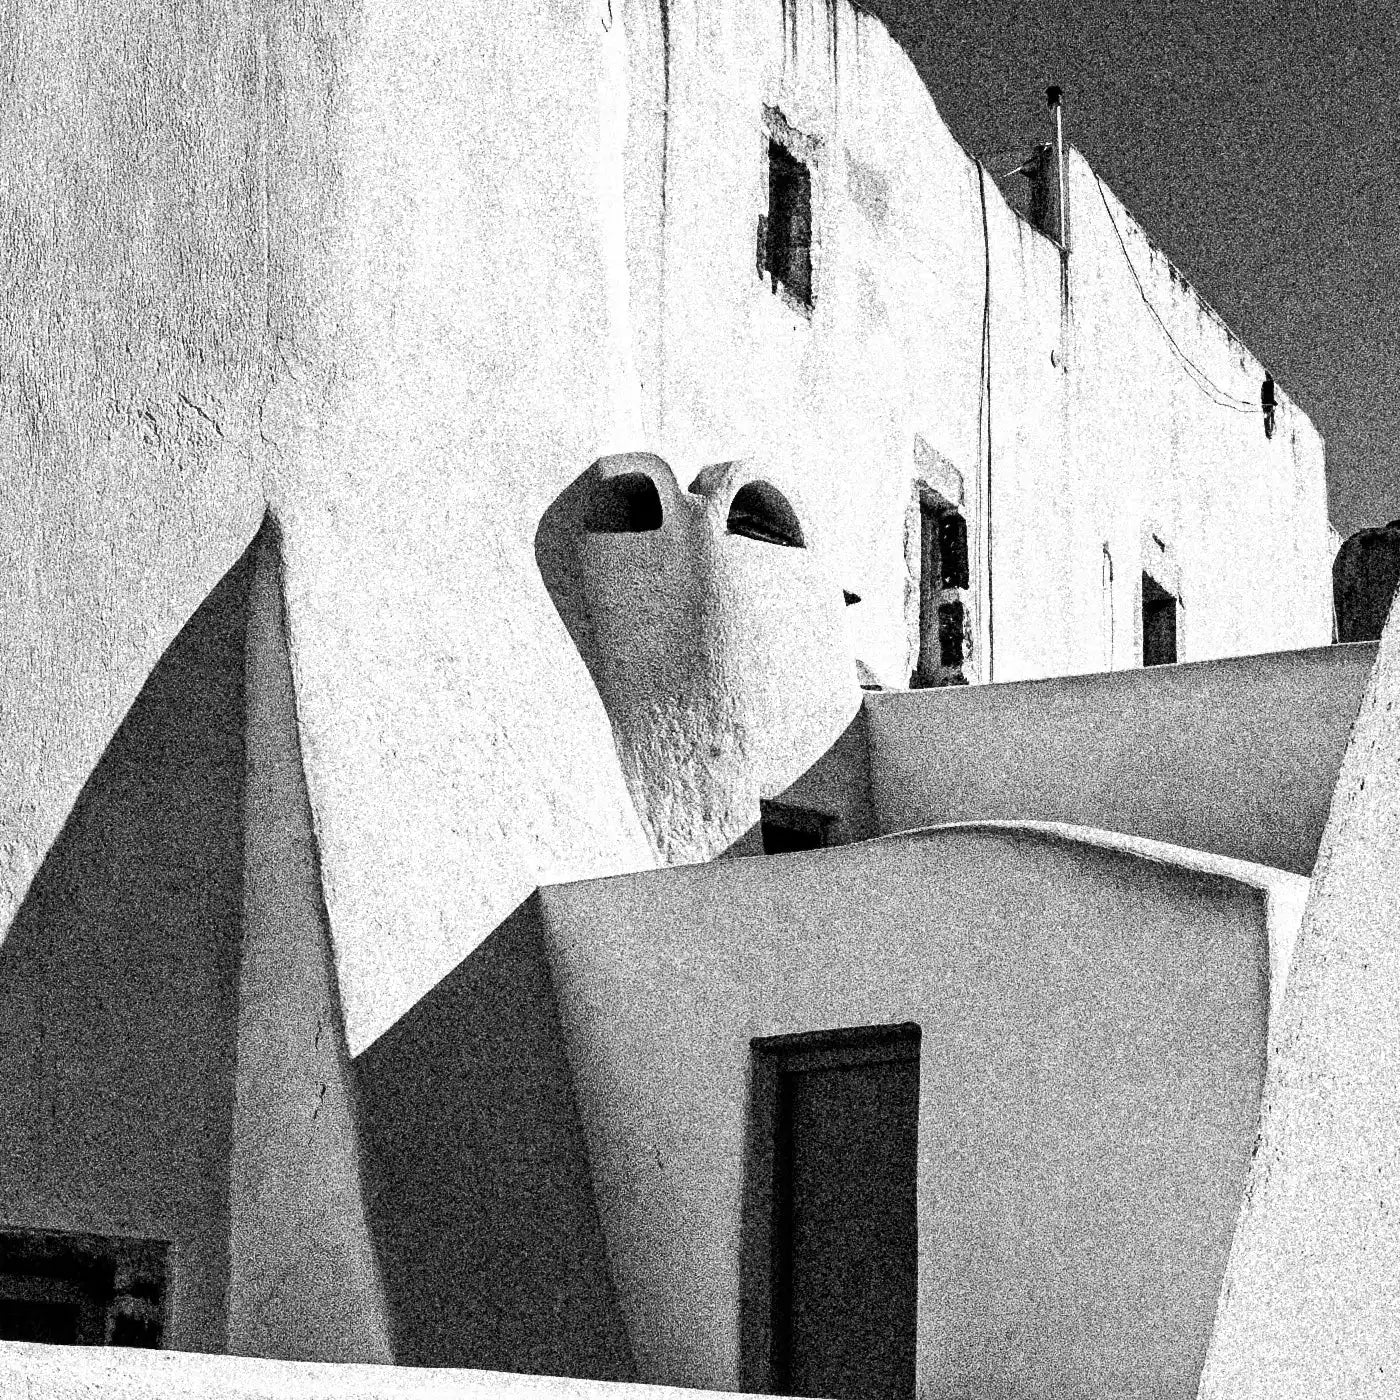 Forms at Emporio | Santorini | Chorōs | Black-and-white wall art photography from Greece - detailed view